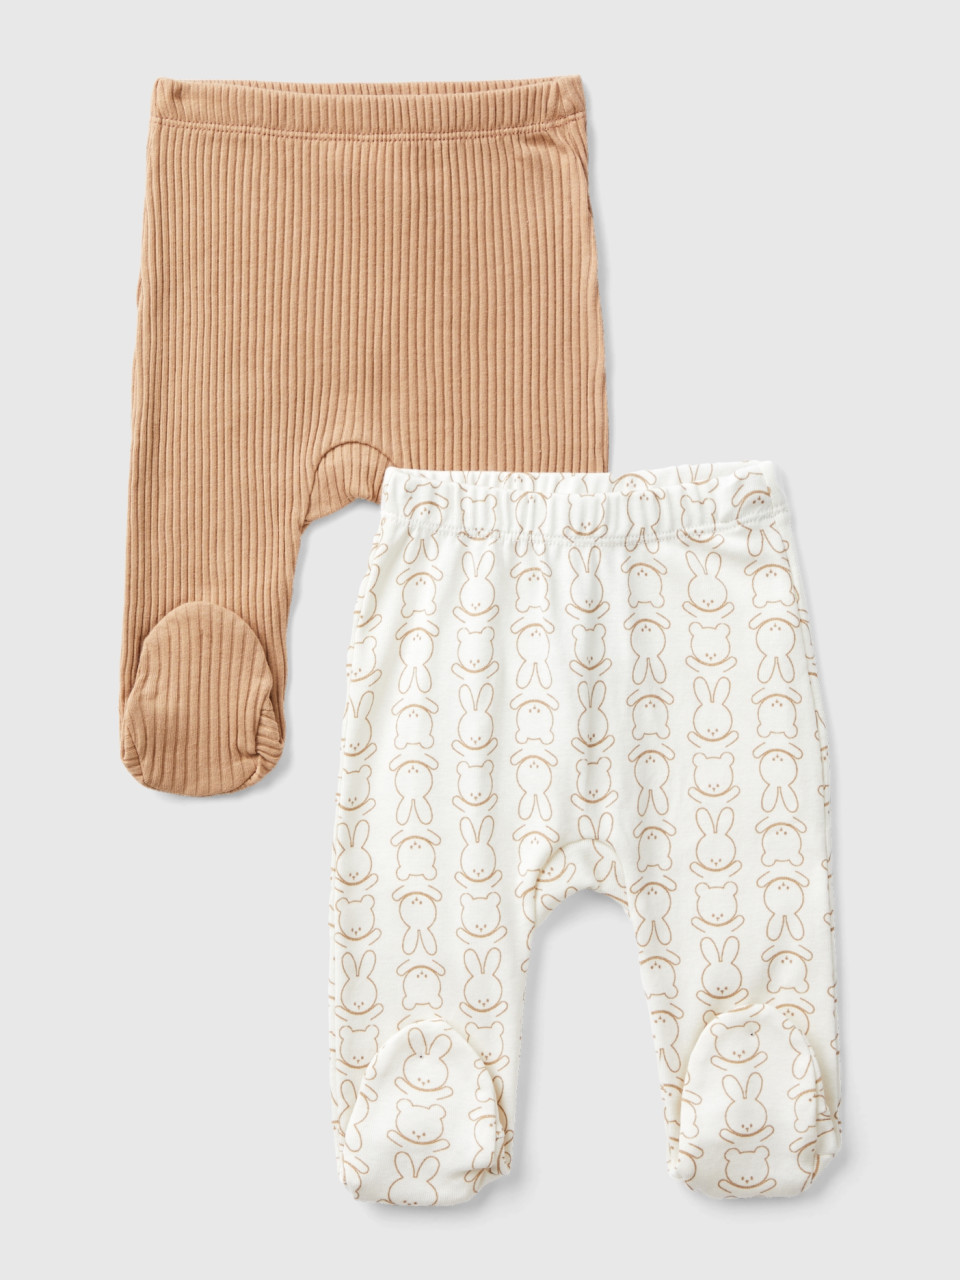 Benetton, Two Pairs Of Stirrup Trousers In Organic Cotton, Beige, Kids